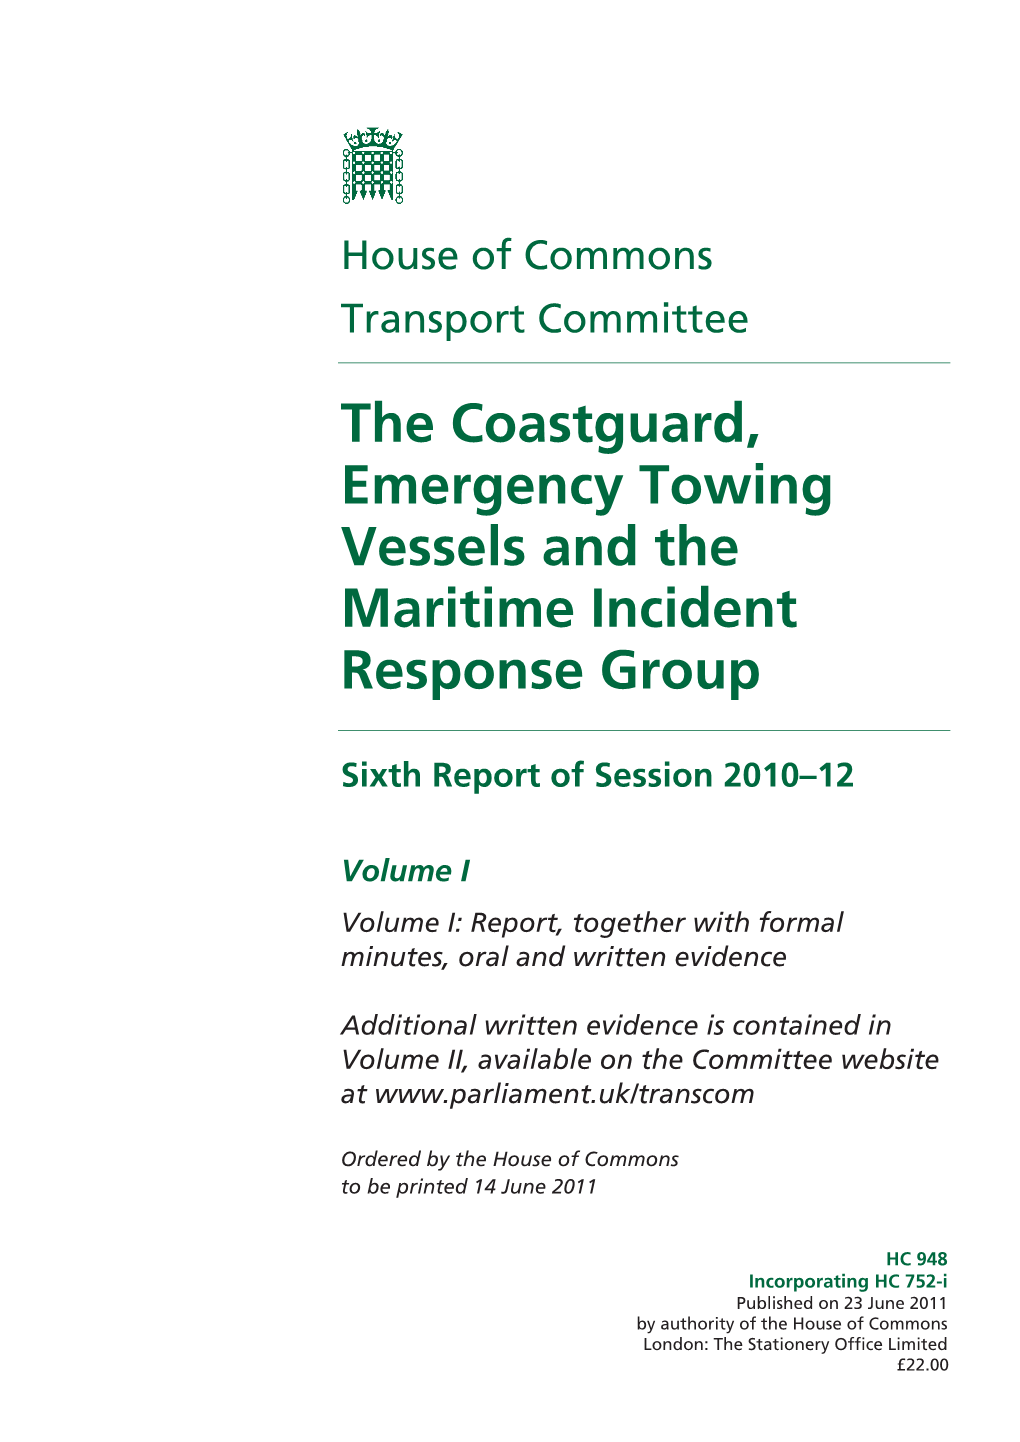 The Coastguard, Emergency Towing Vessels and the Maritime Incident Response Group